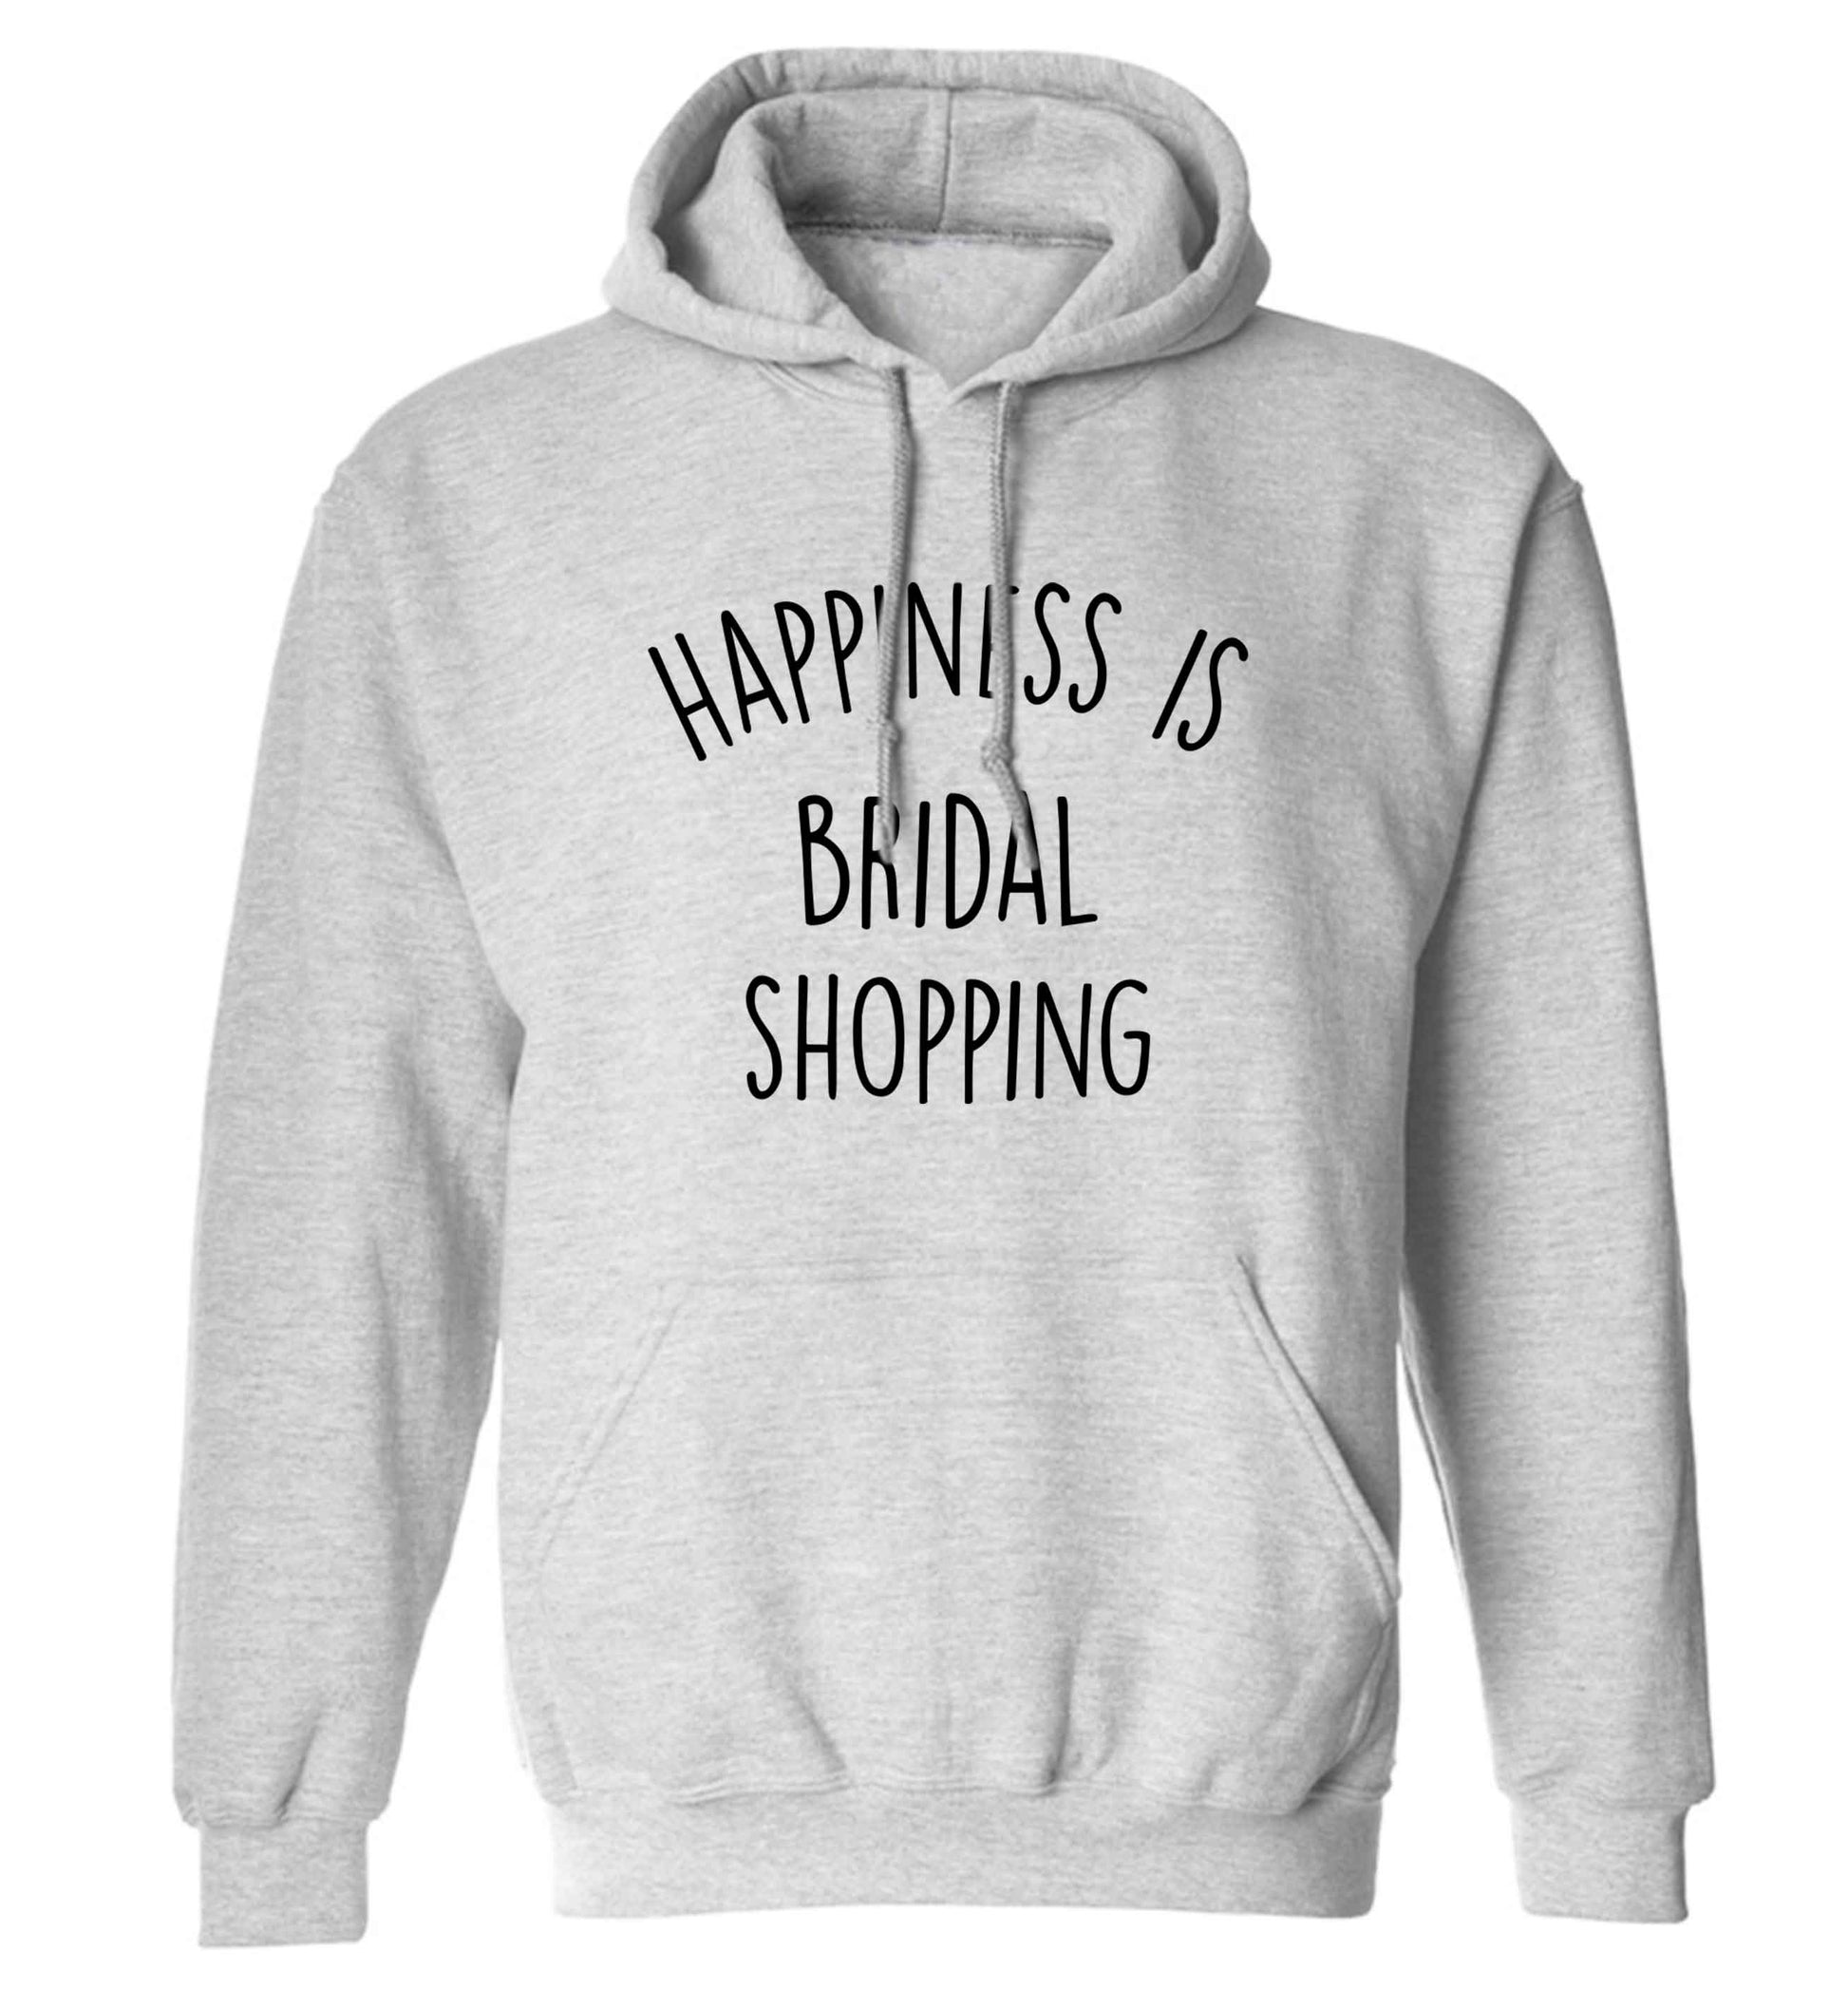 Happiness is bridal shopping adults unisex grey hoodie 2XL